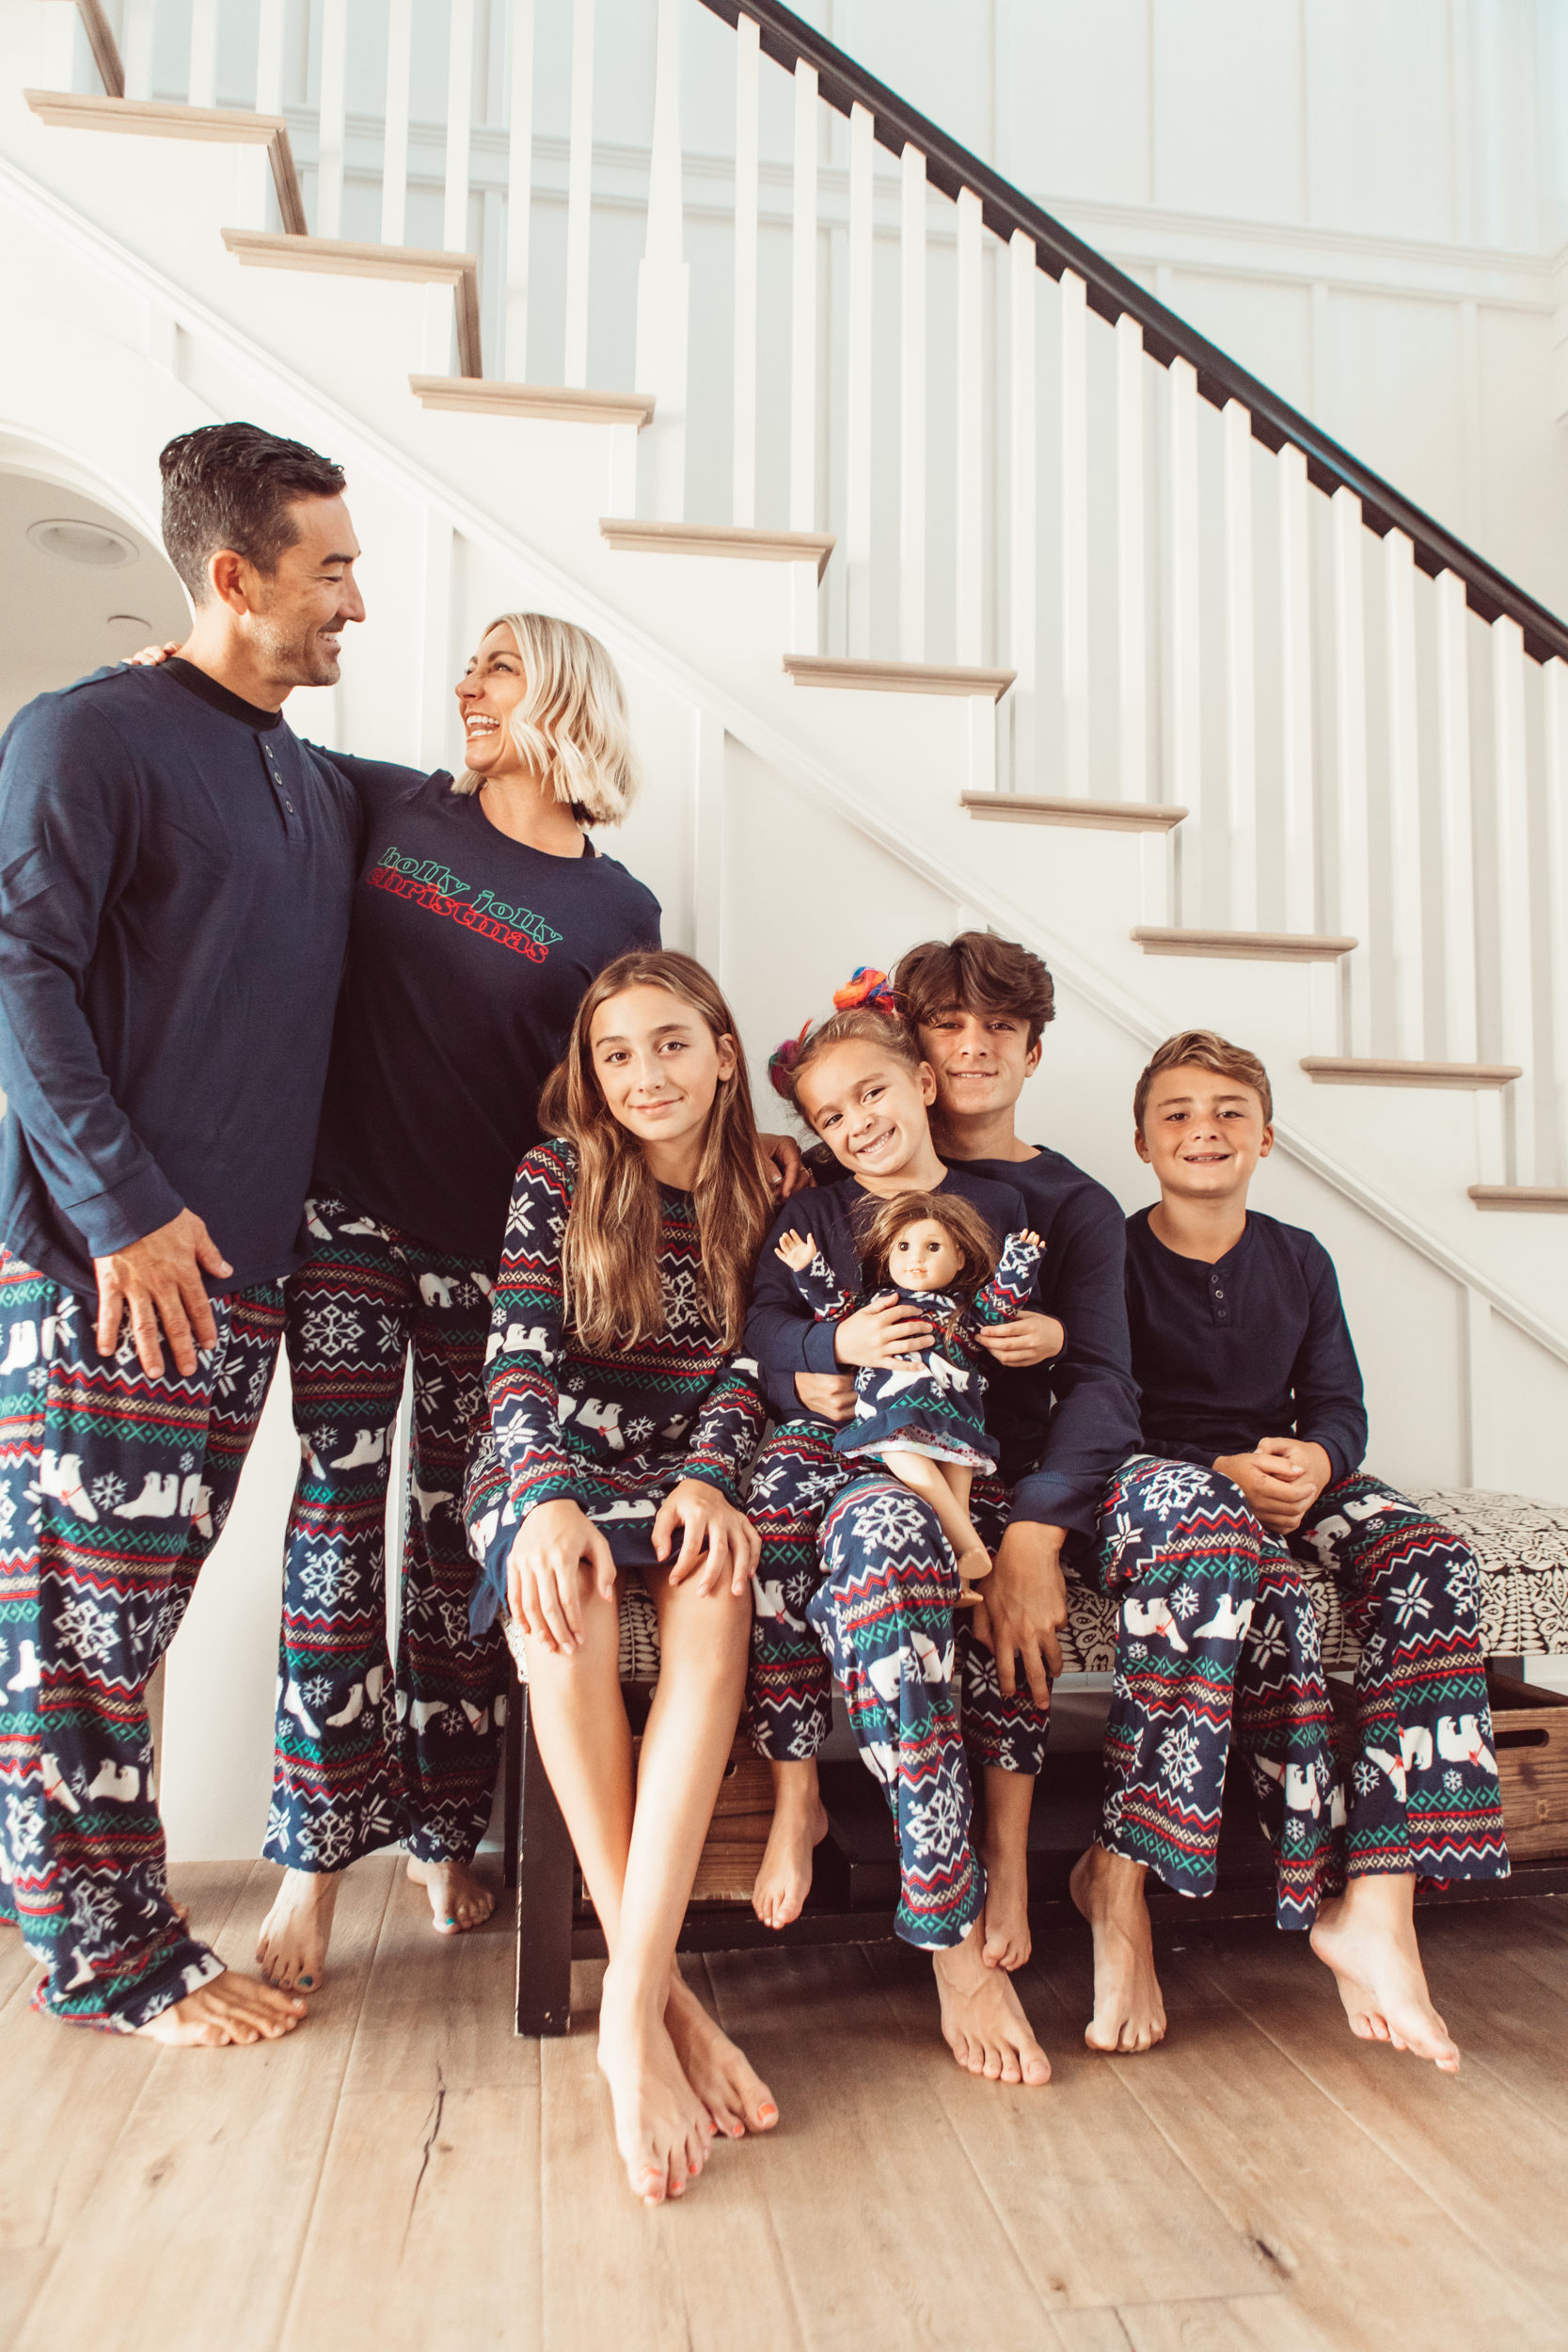 family in matching pajamas by staircase